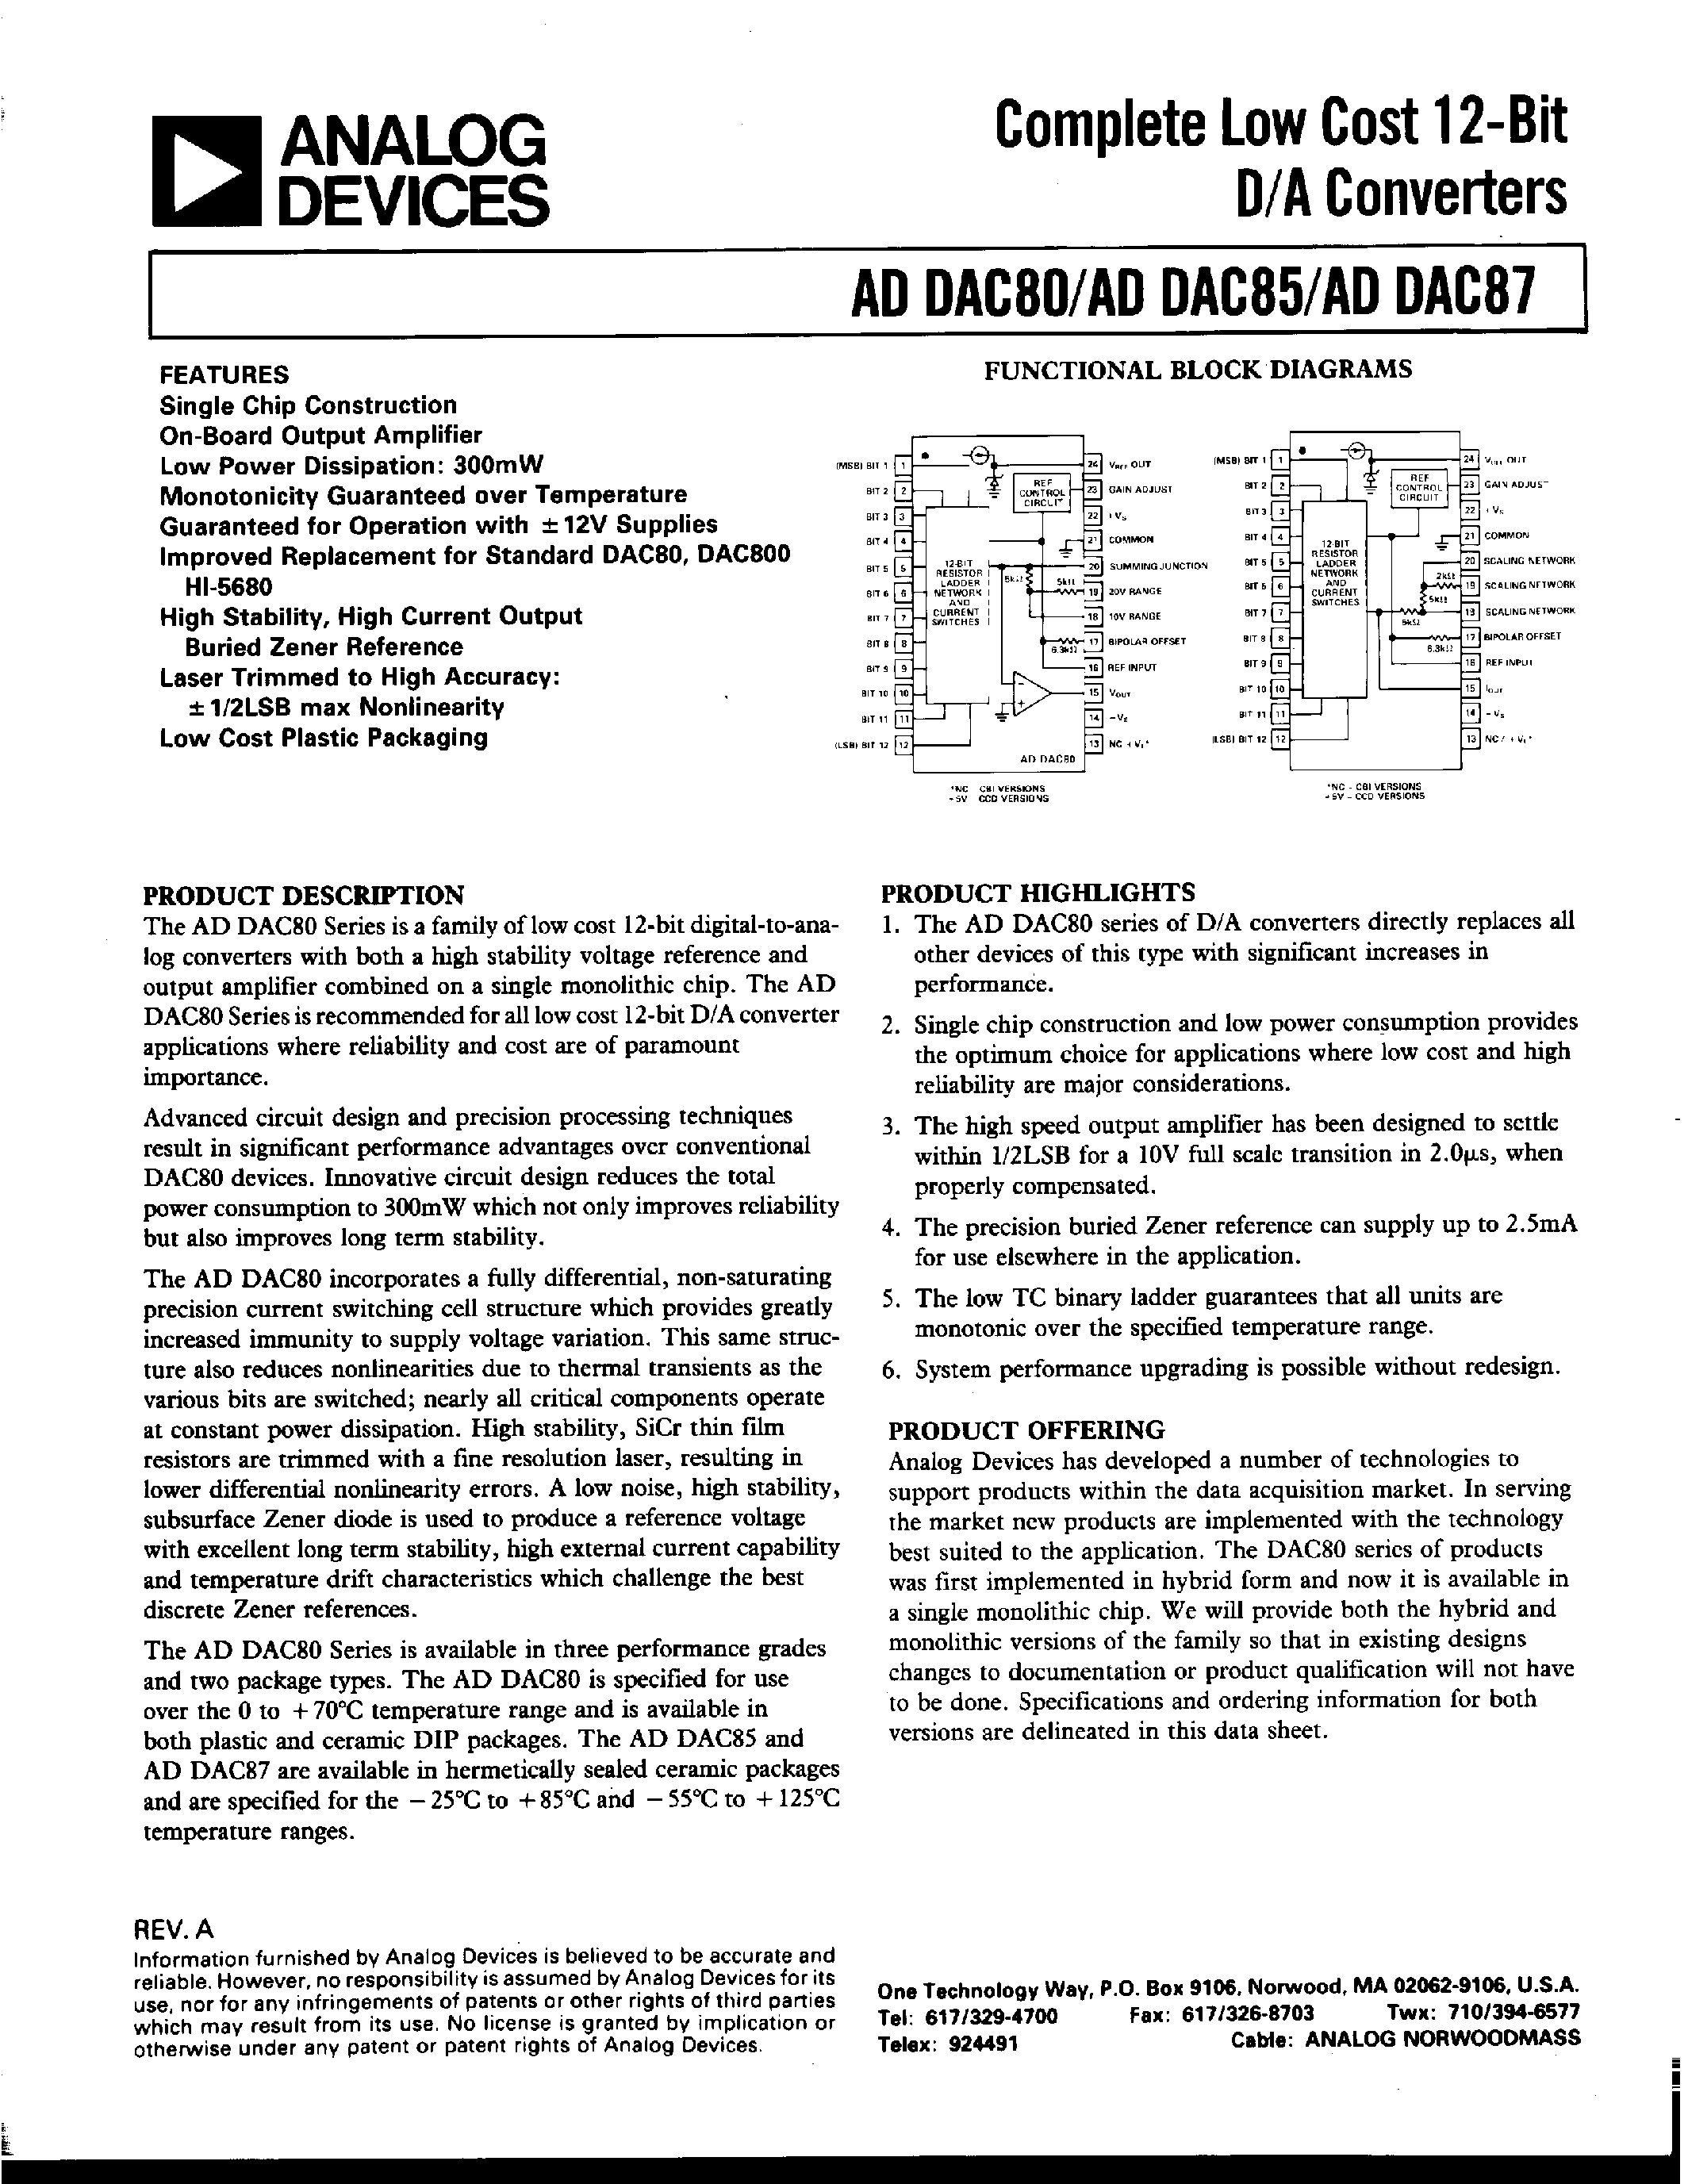 Datasheet ADDAC85-CBI-V - COMPLETE LOW COST 12-BIT D/A CONVERTERS page 1